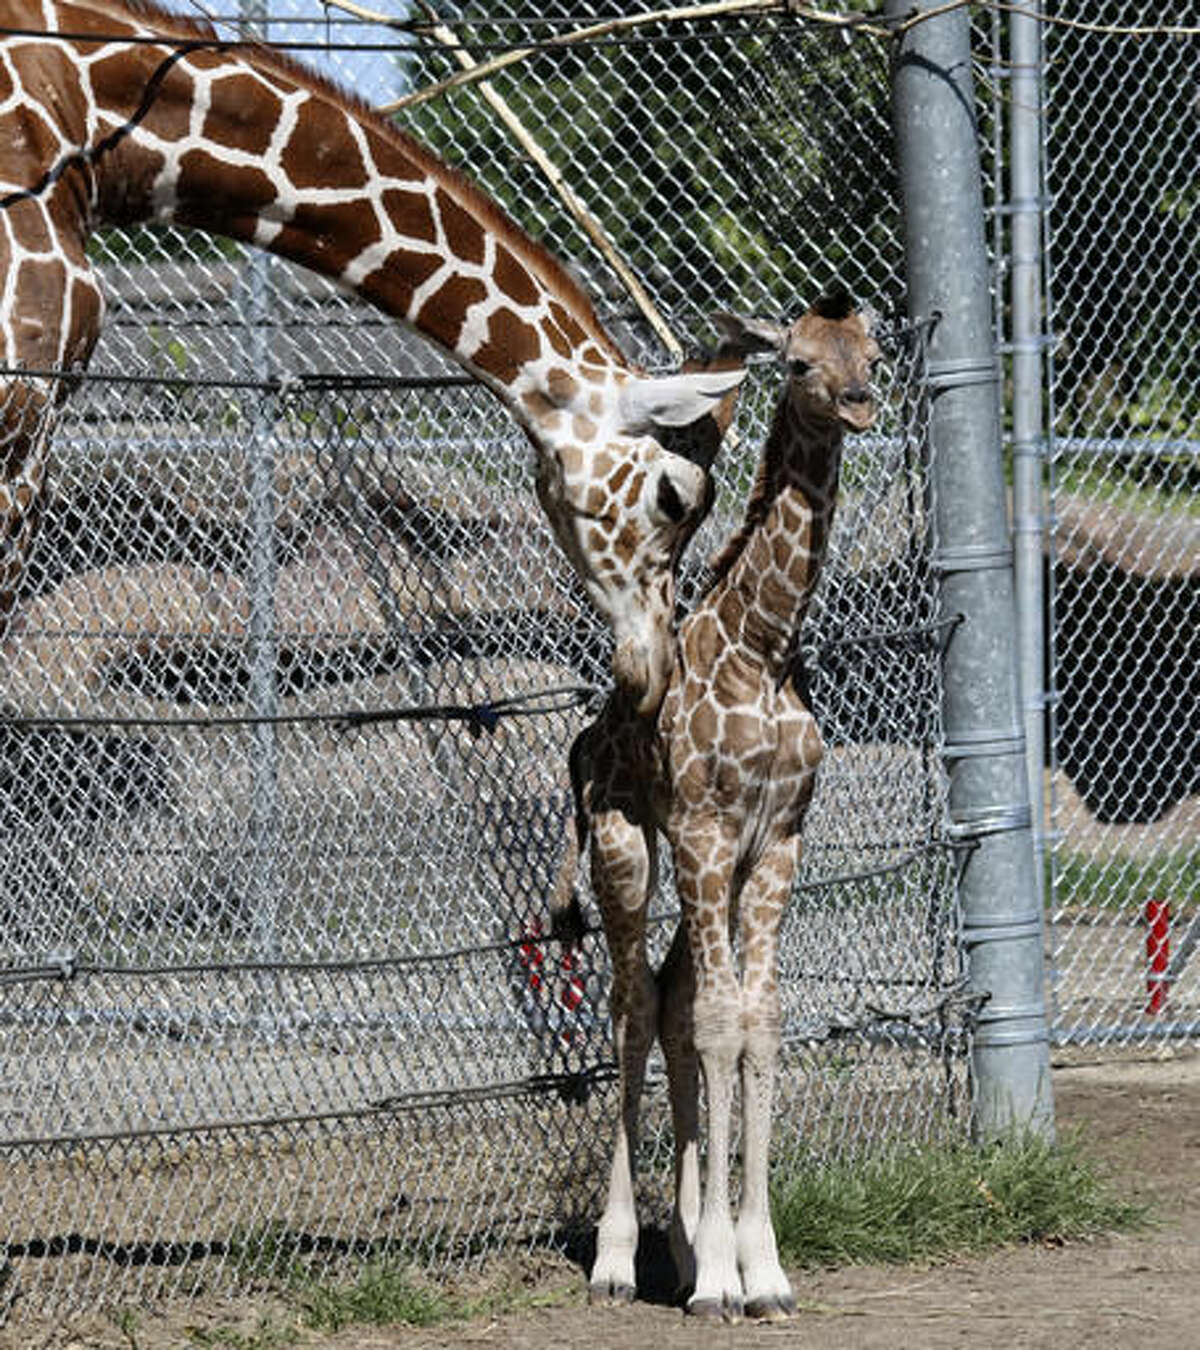 In this Sunday, Aug. 7, 2016, photo provided by the Detroit Zoo, a giraffe calf, right, is visited by her big brother, Mpenzi, at the Detroit Zoo in Royal Oak, Mich. The yet-unnamed calf was born on Saturday, Aug. 6, at the giraffe habitat of the Detroit Zoo and already stands more than 5 feet tall, according to the zoo. (Jennie Miller/Detroit Zoo via AP)